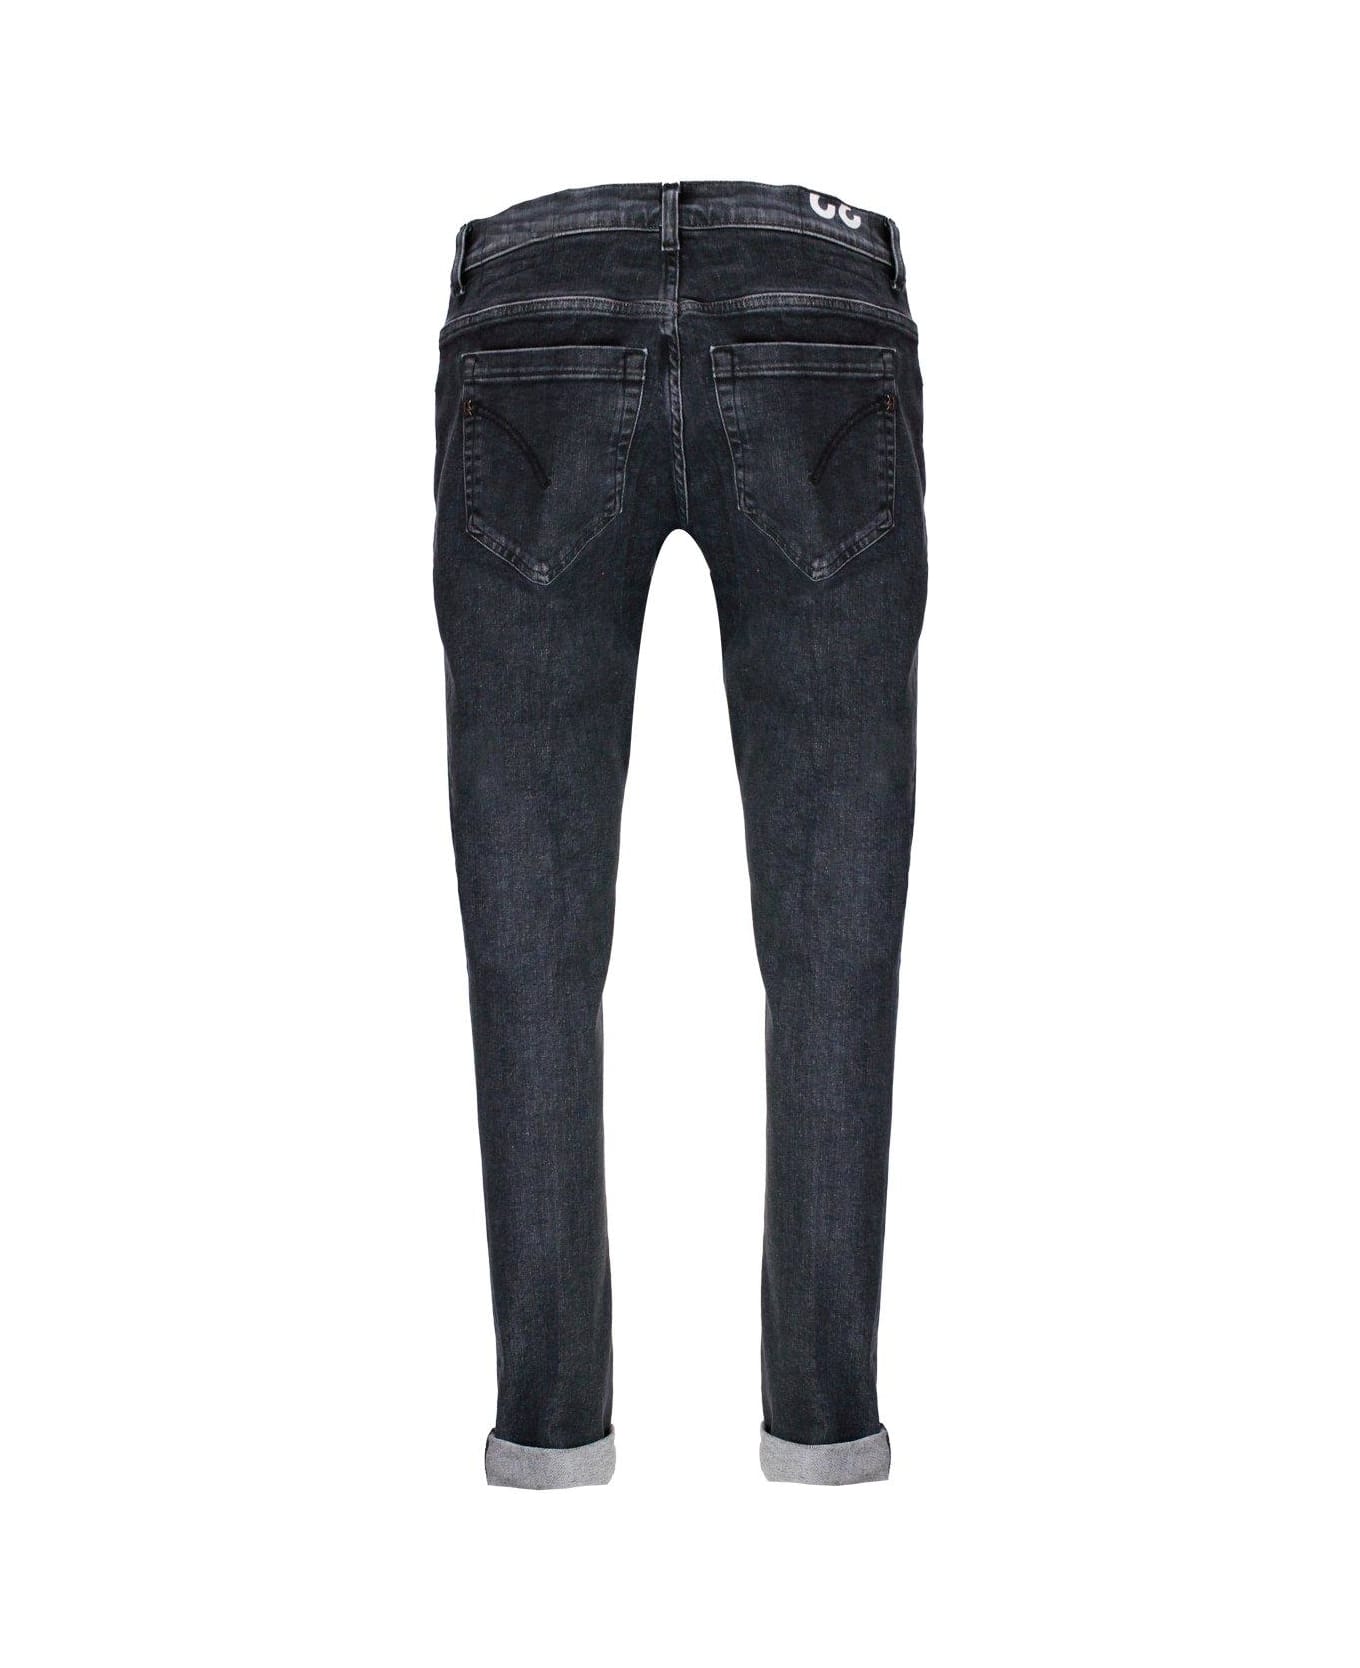 Dondup Turn-up Cuffs Stretched Jeans Dondup - BLACK